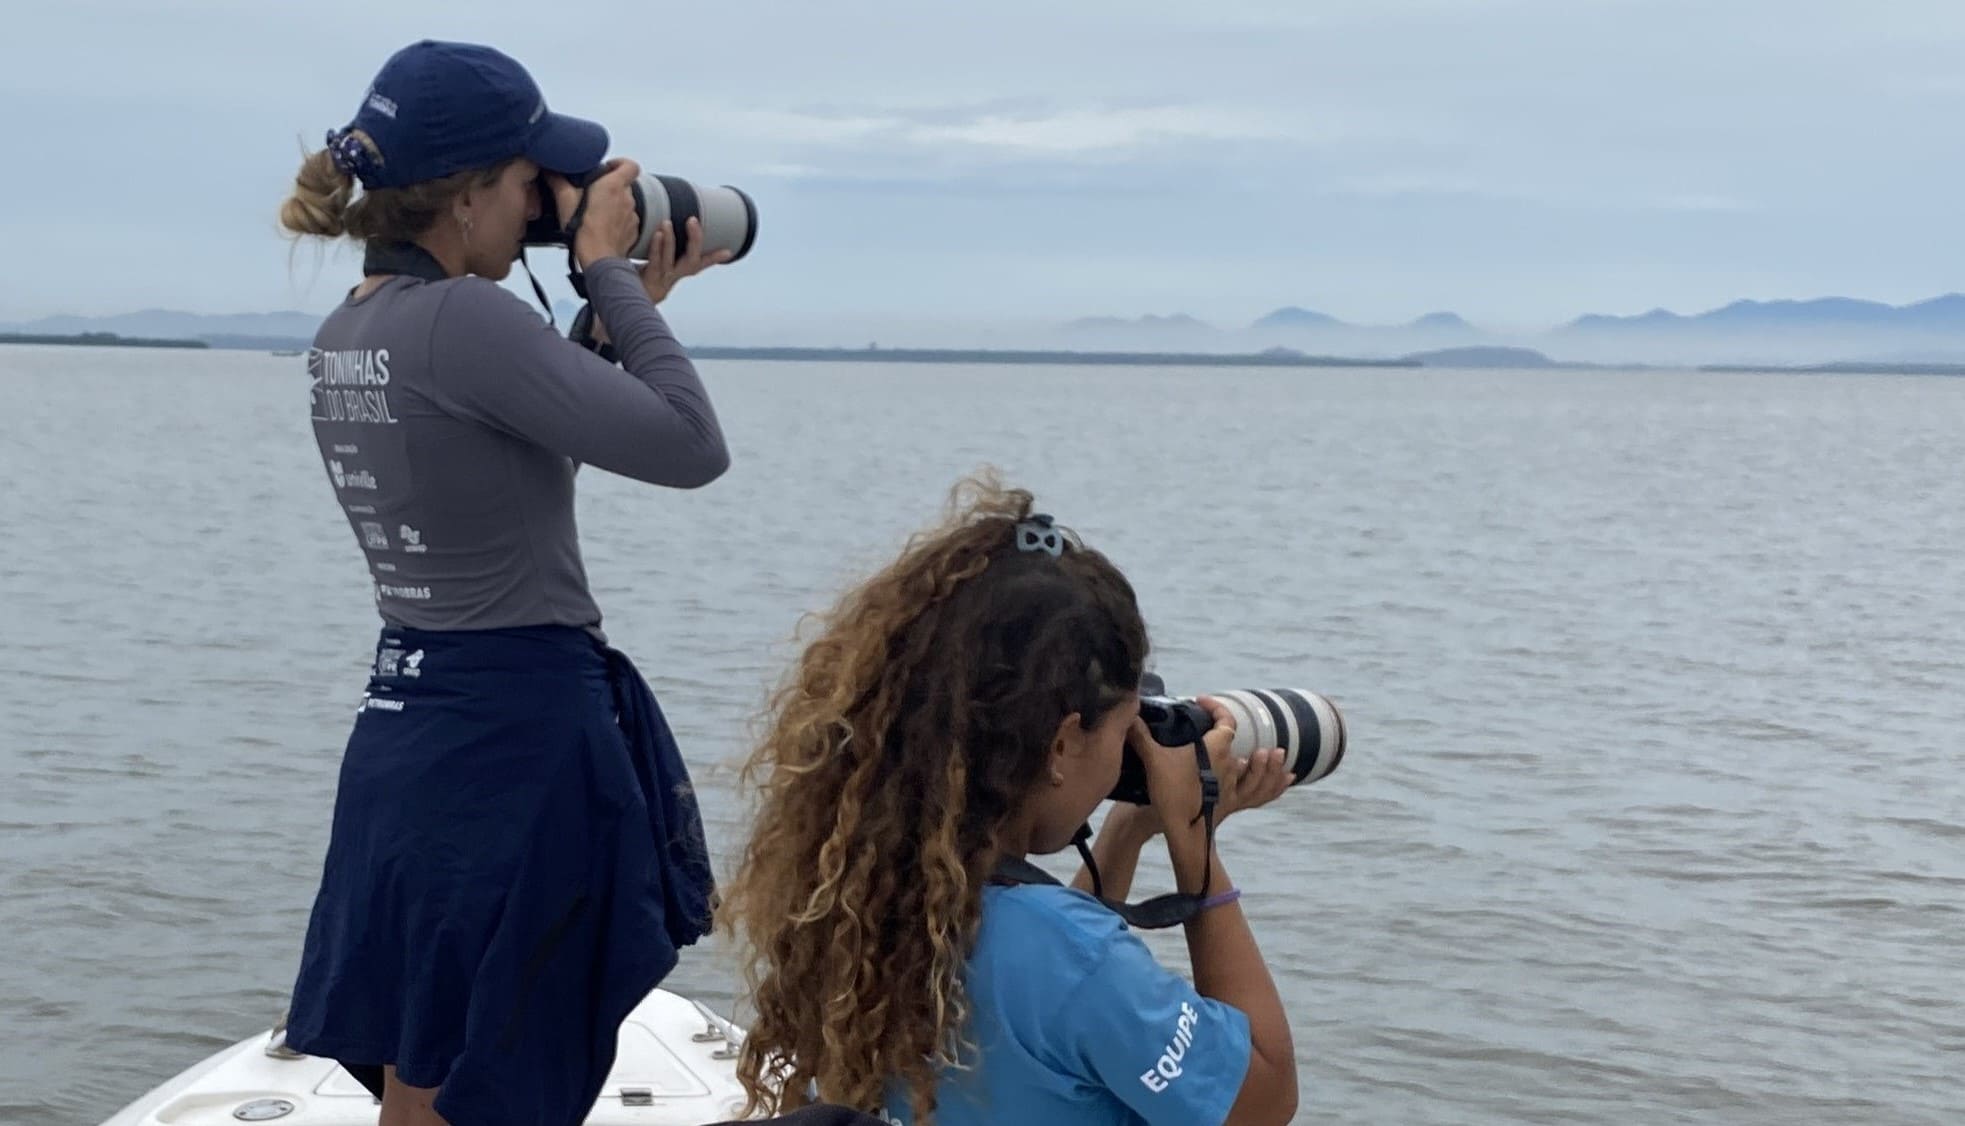 Two researchers at Toninhas do Brasil holding cameras while monitoring the porpoises in Babitonga Bay.